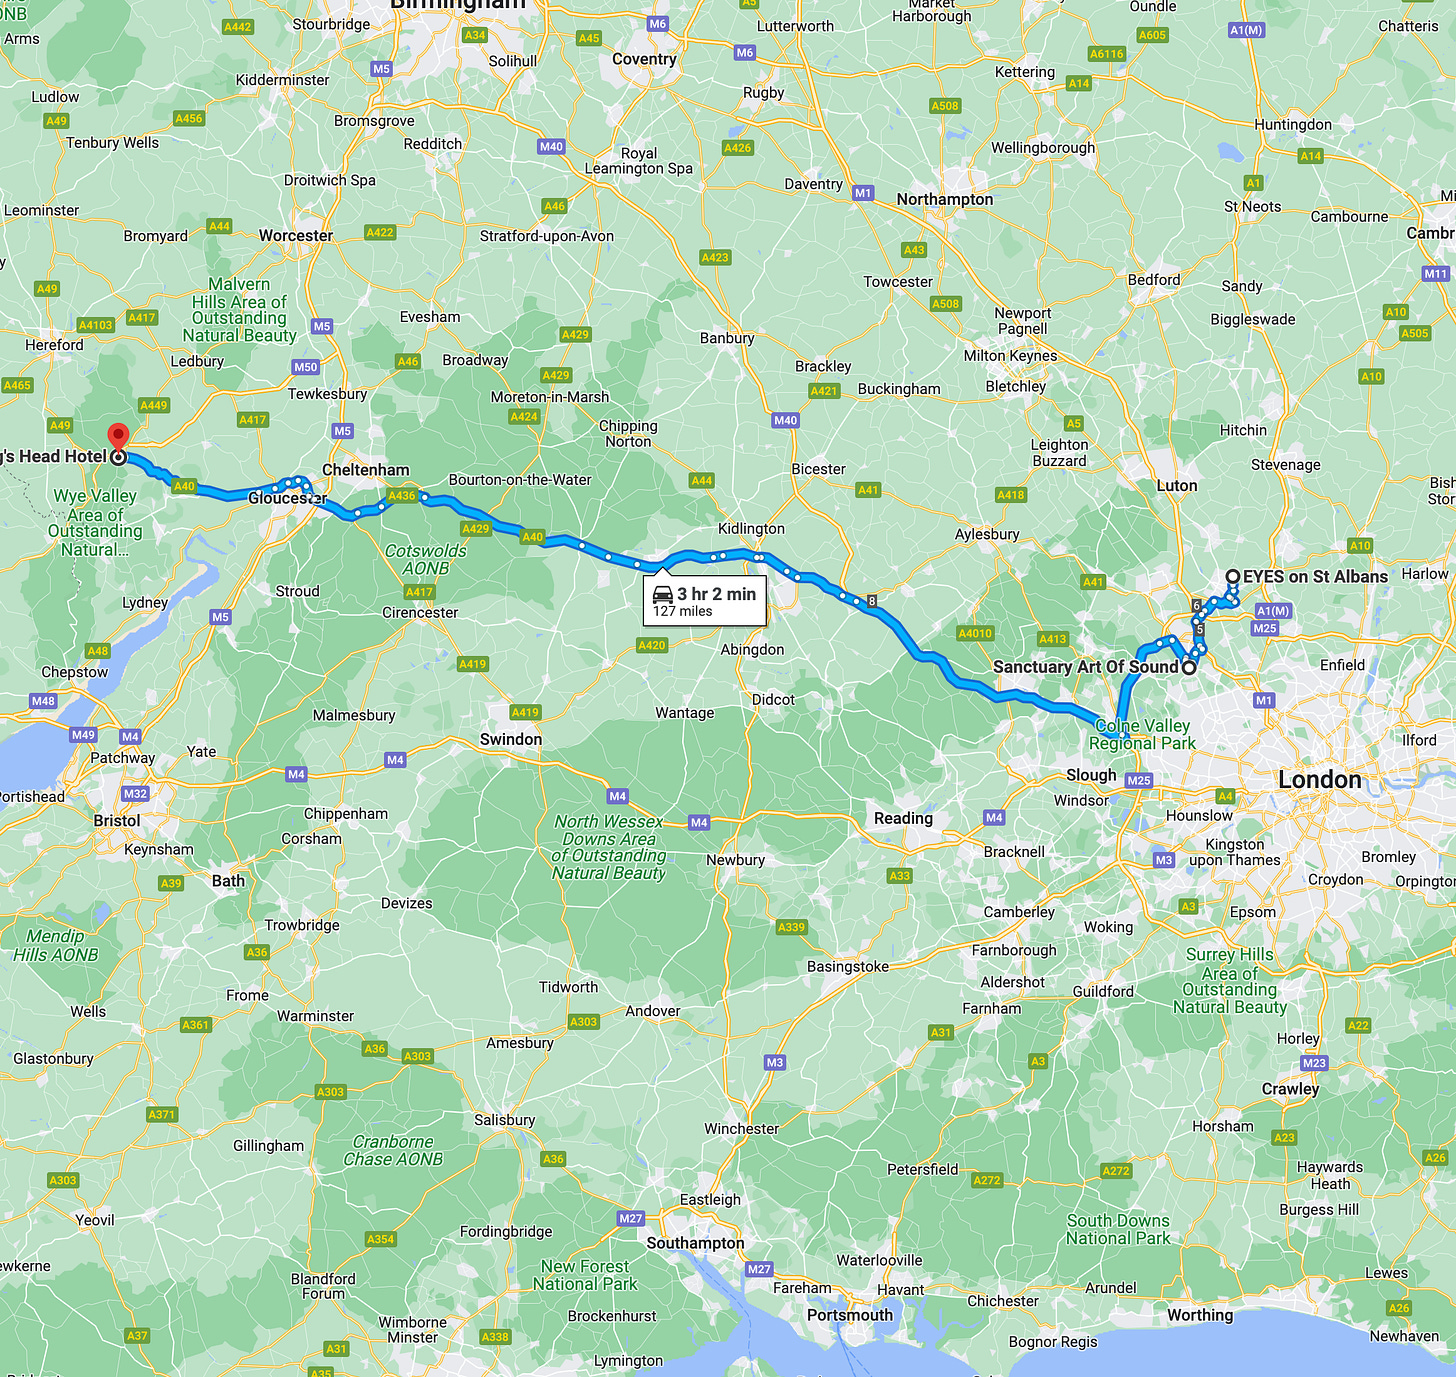 A map showing the route from St Albans to Ross-on-Wye, UK